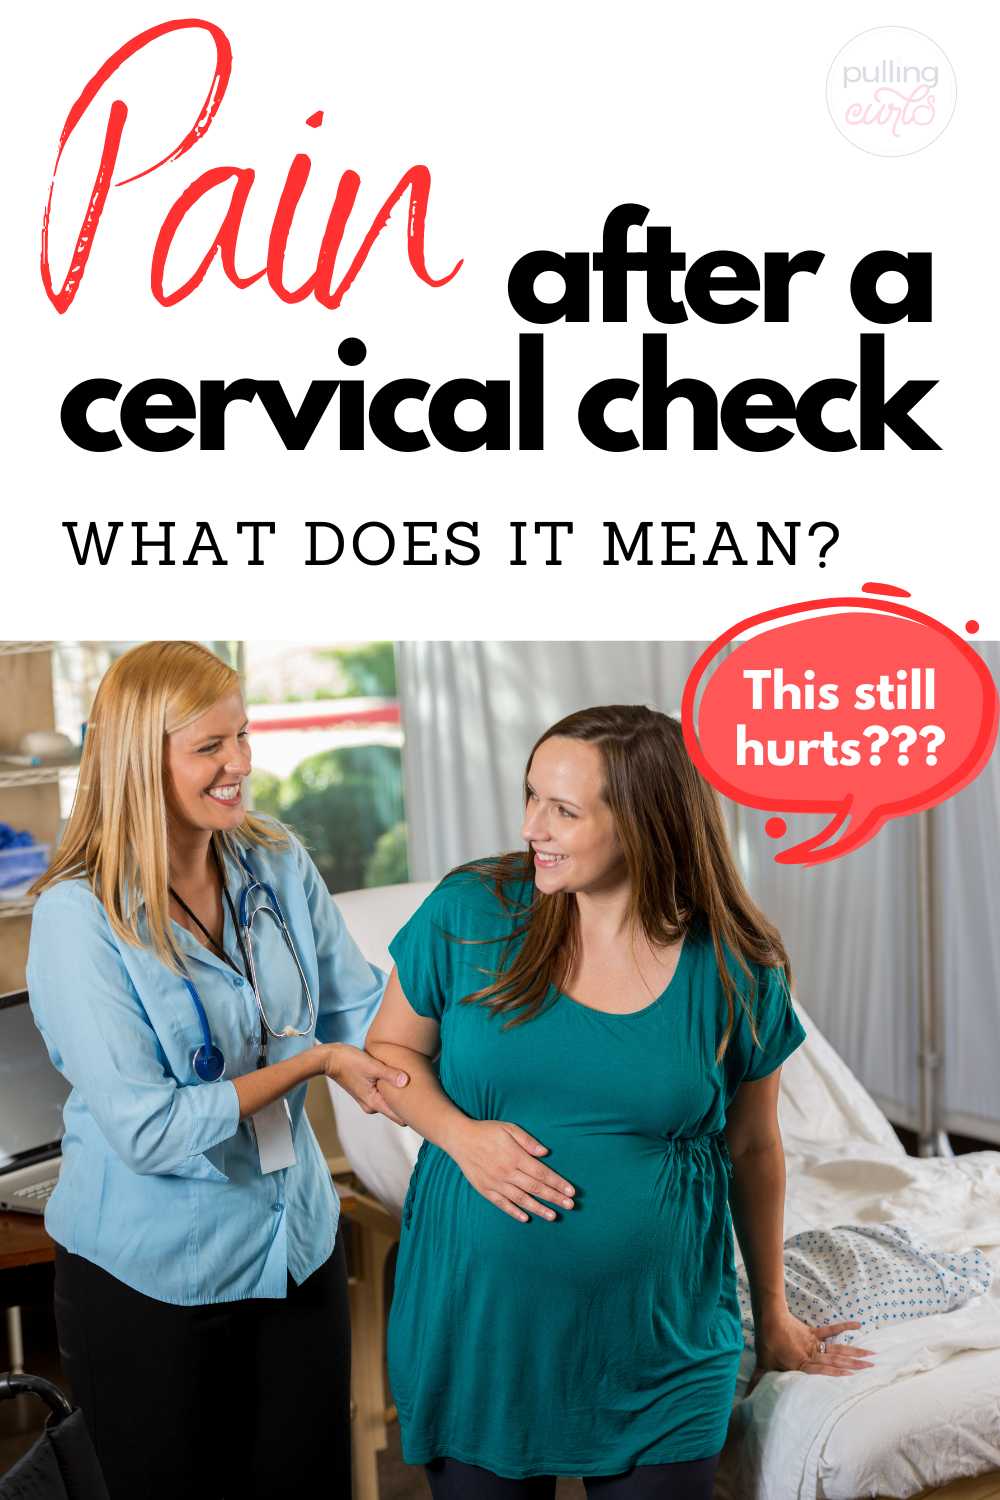 You're not alone! Many women report experiencing a similar discomfort following a cervical check. The pain can be surprising, but it's usually a normal part of the process. Stick around as we shed light on why the pain occurs, when to expect it, and practical tips on managing it to make your journey less daunting. via @pullingcurls